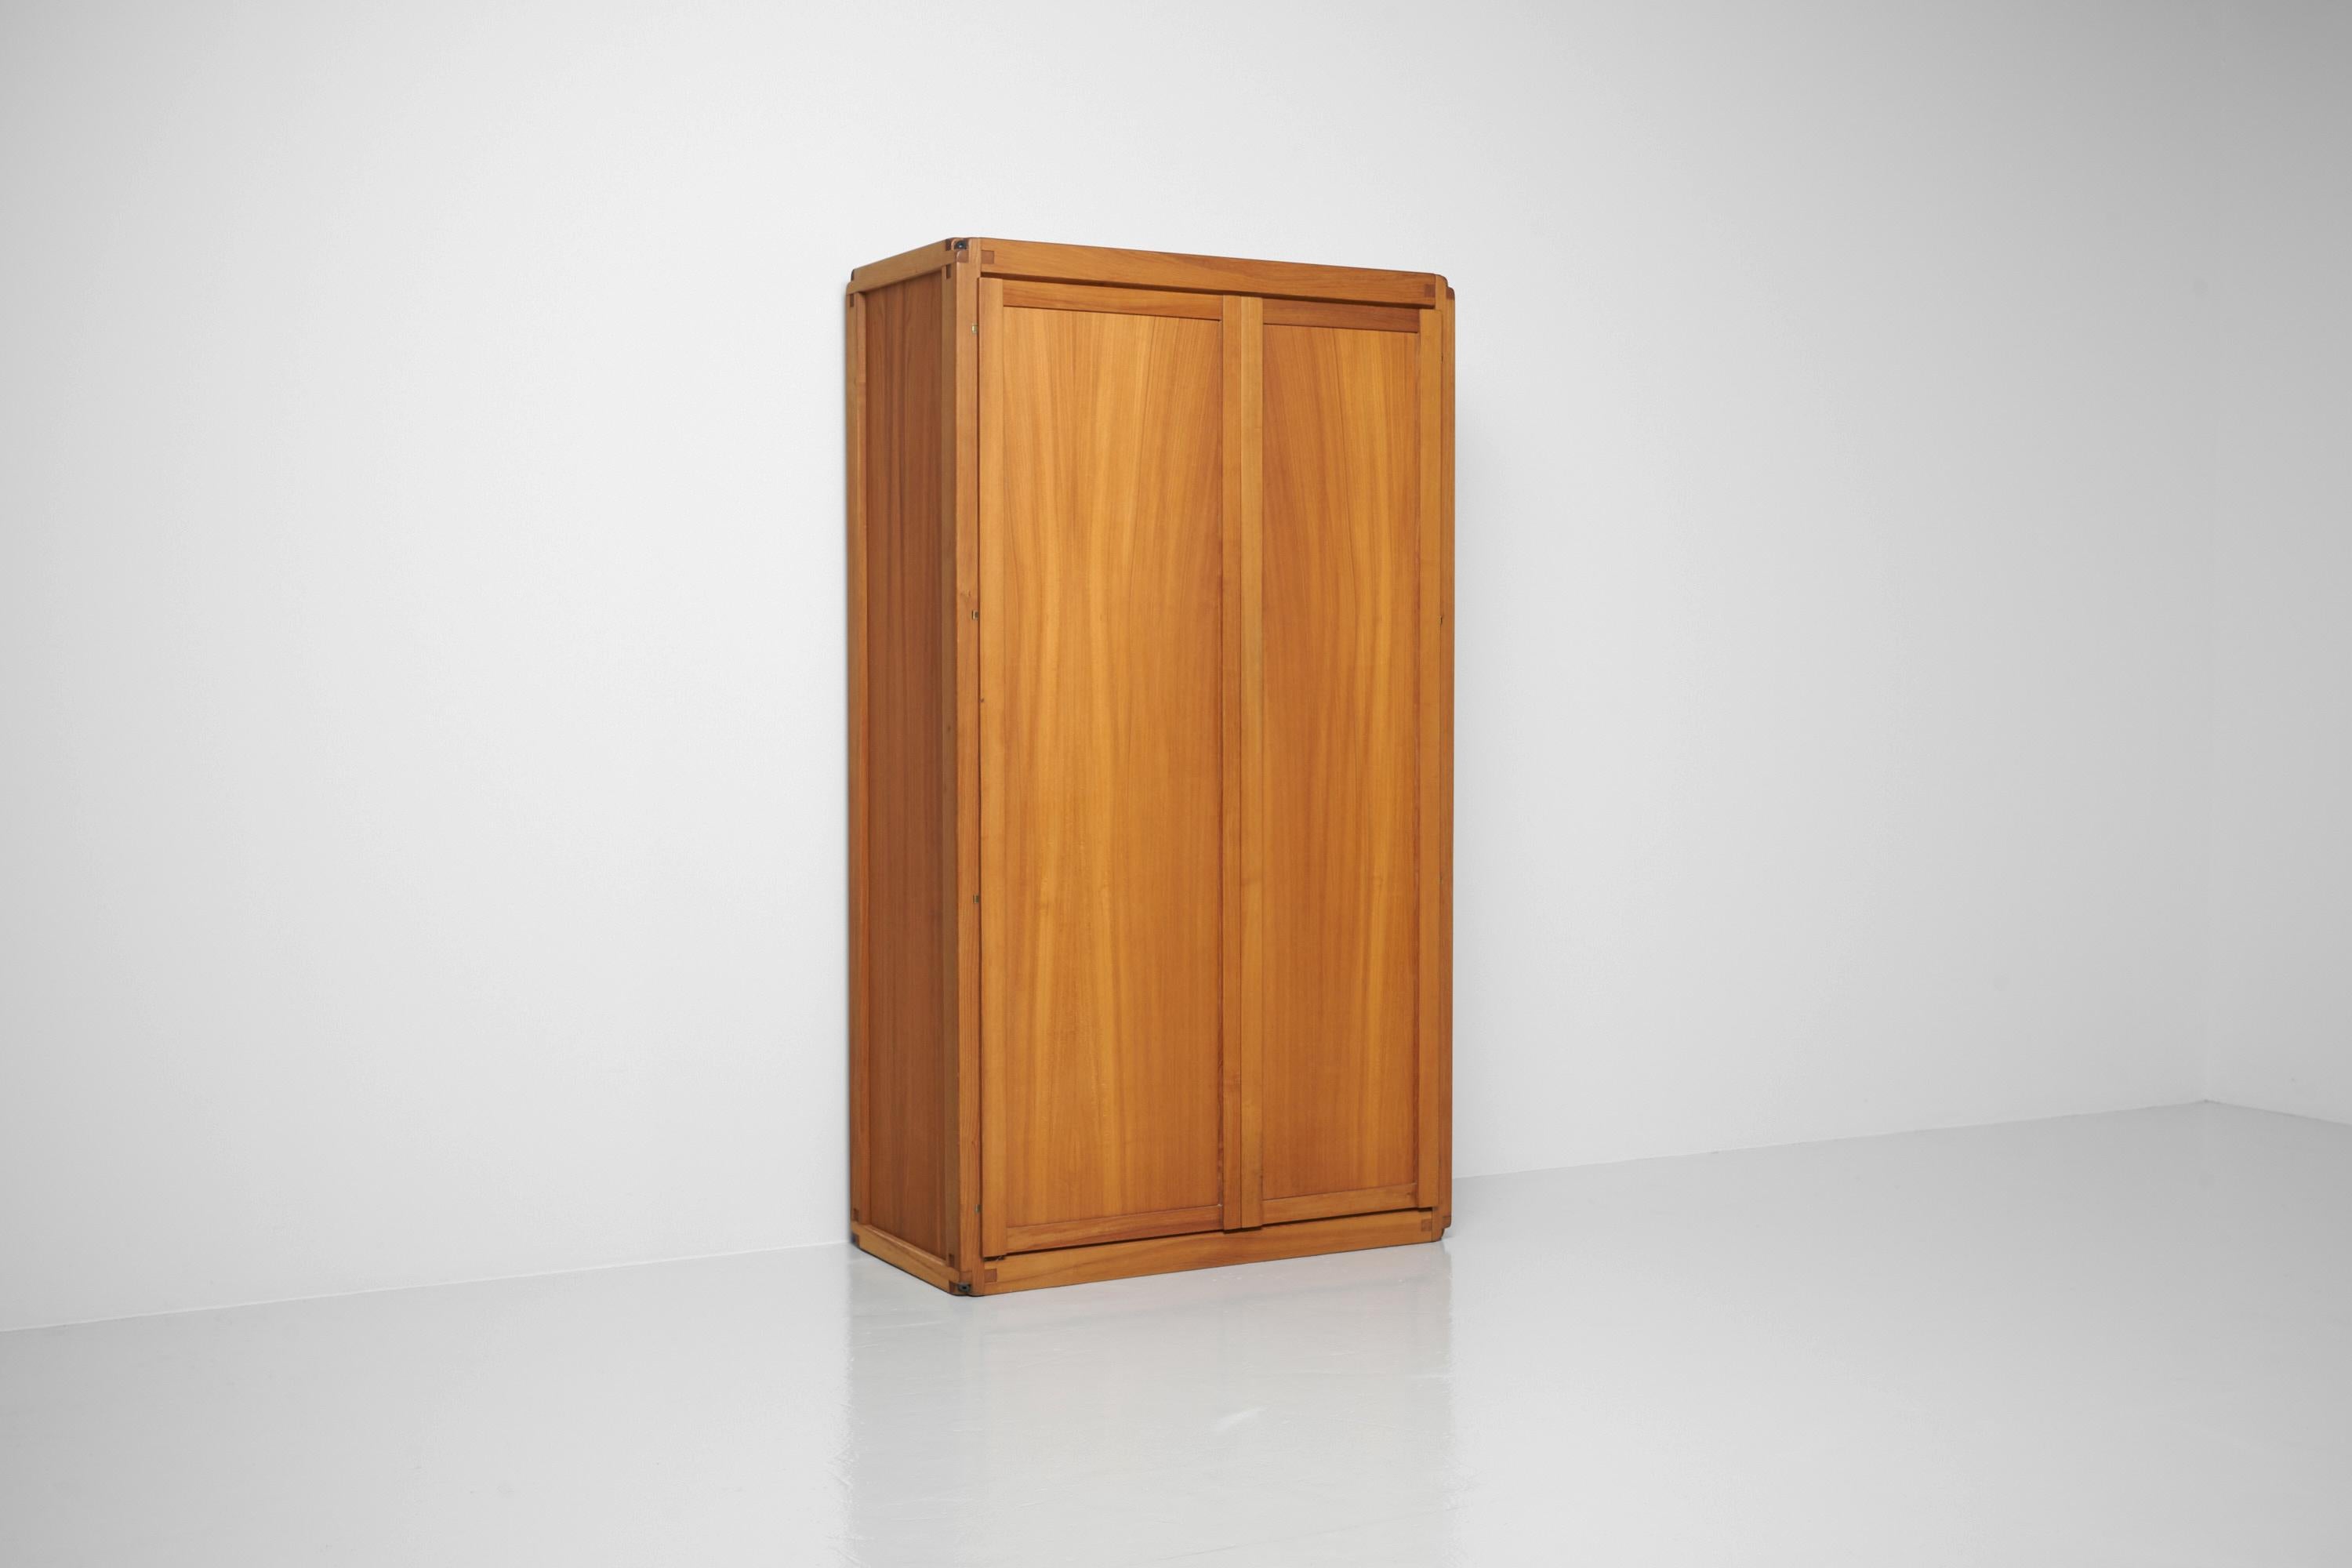 A very nice and minimal B10 wardrobe with adjustable shelves, designed by Pierre Chapo and was made in his own atelier in France, 1960. The B10 is one of the more familiar designs that Chapo made, as this was a modular principle what he designed,